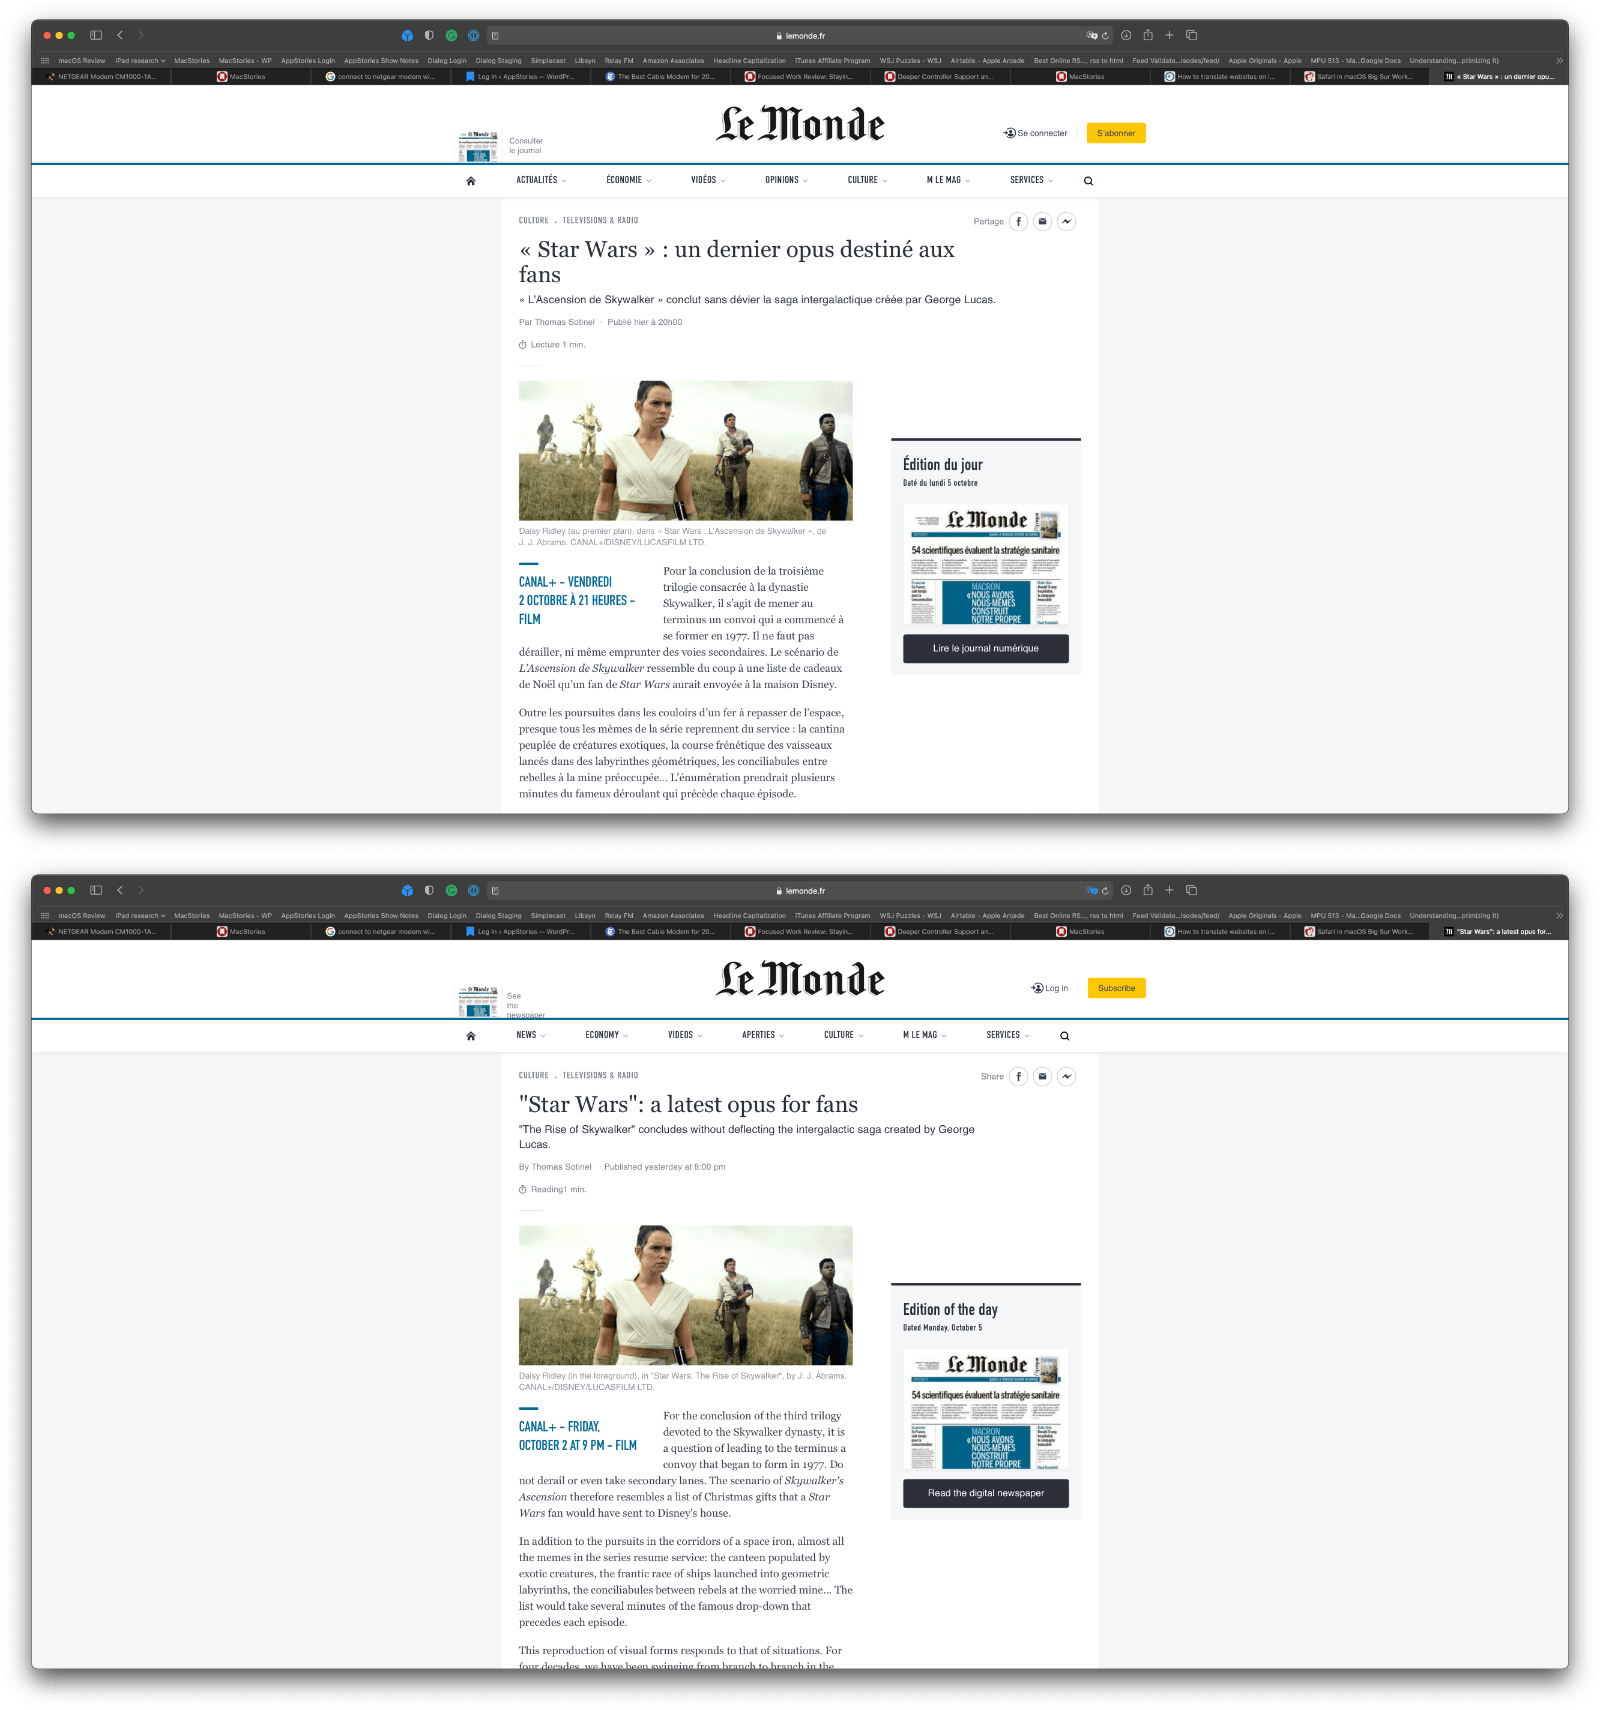 Translating an article from French to English in Safari.